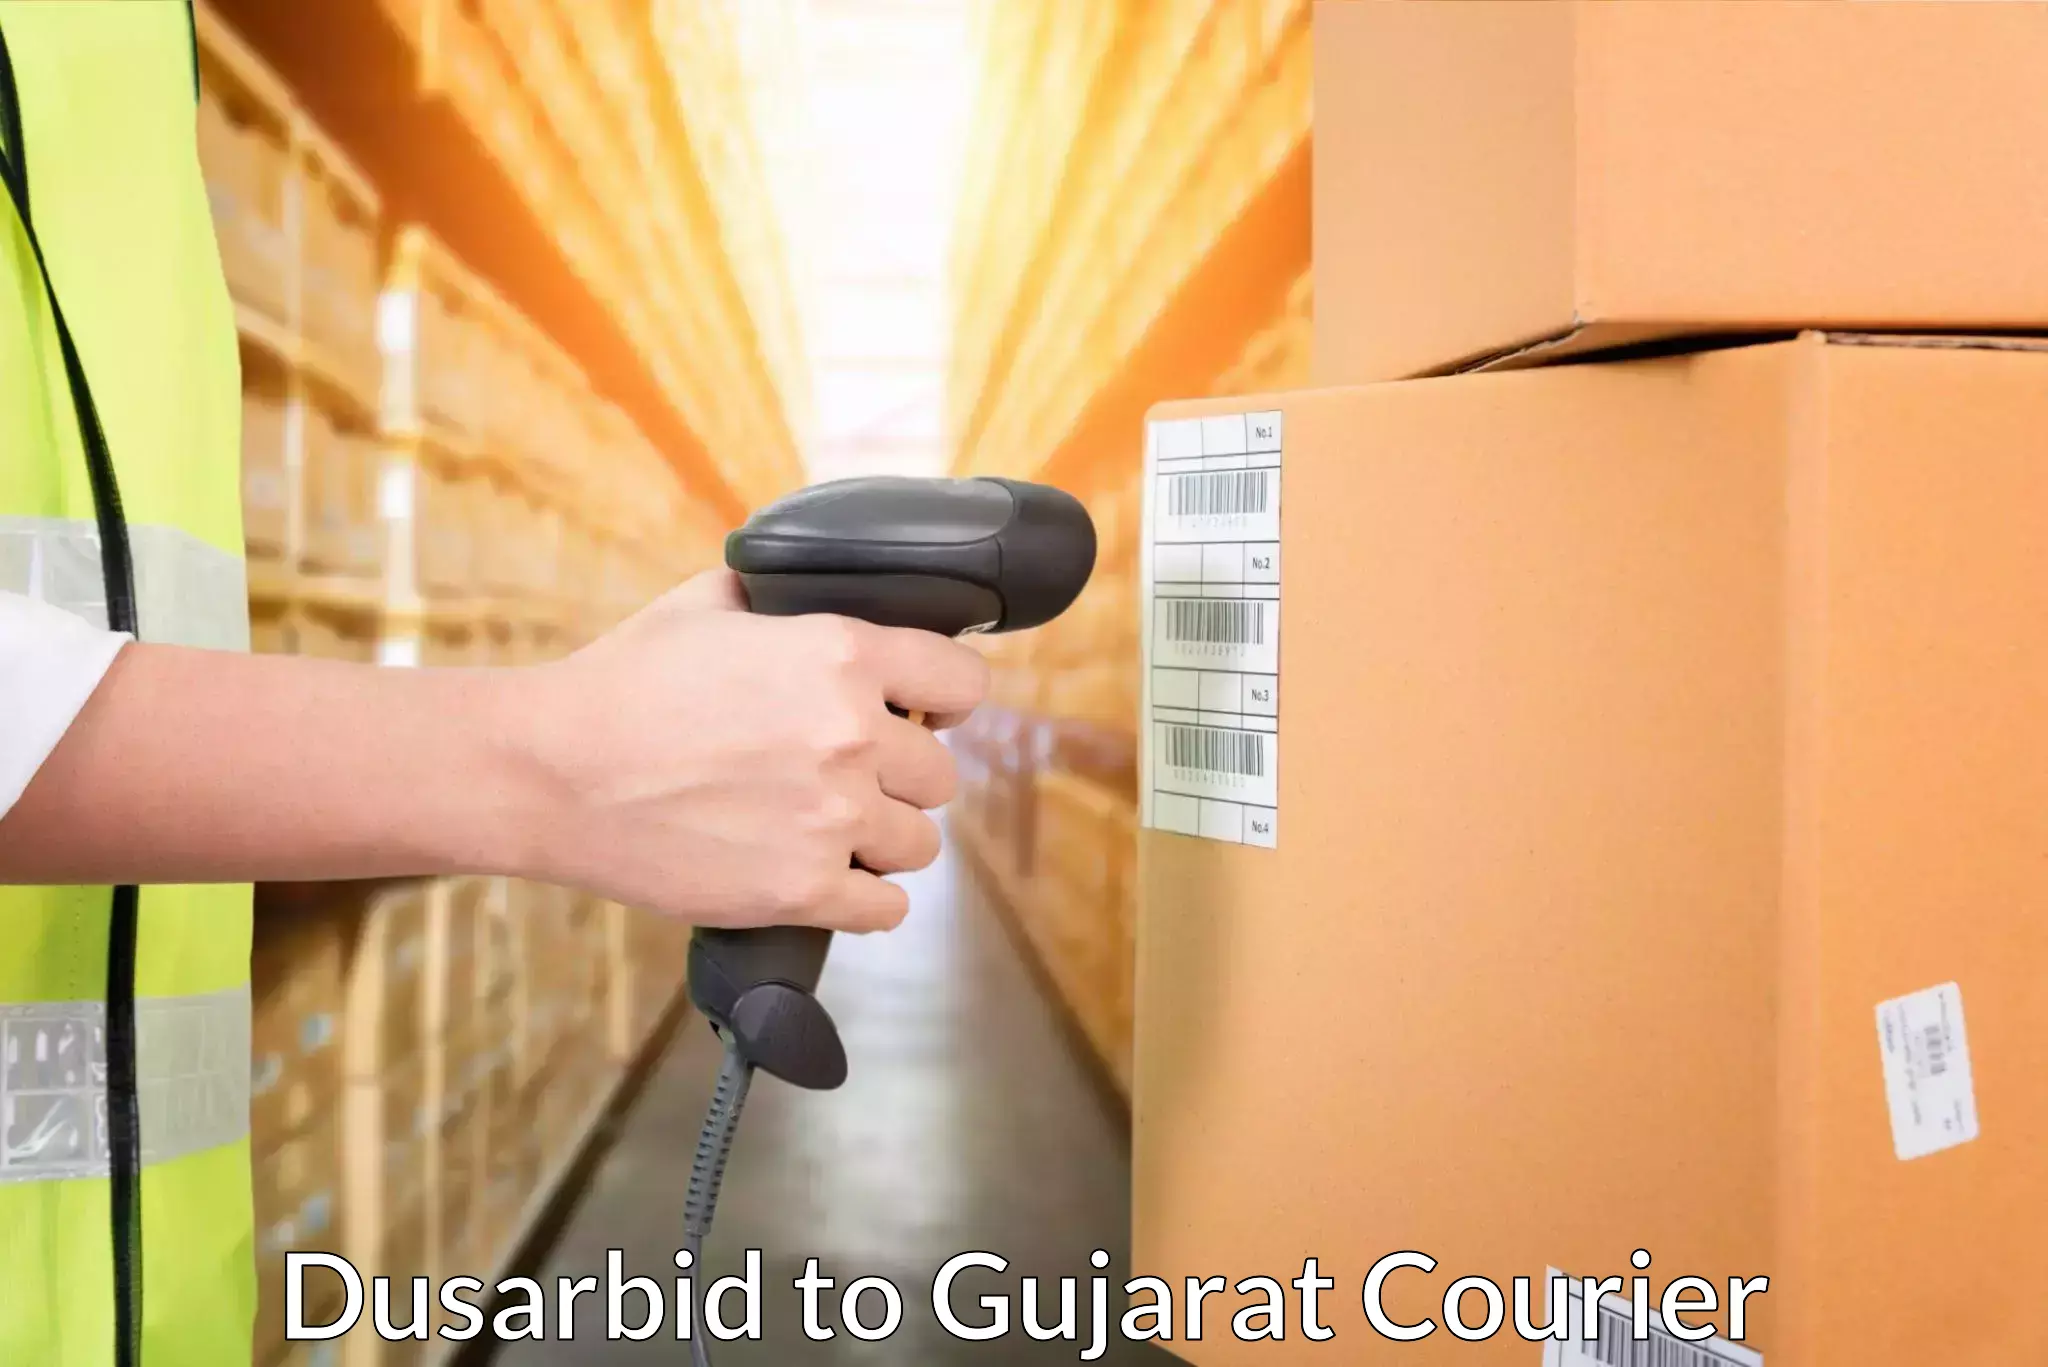 Rapid shipping services in Dusarbid to Vijapur